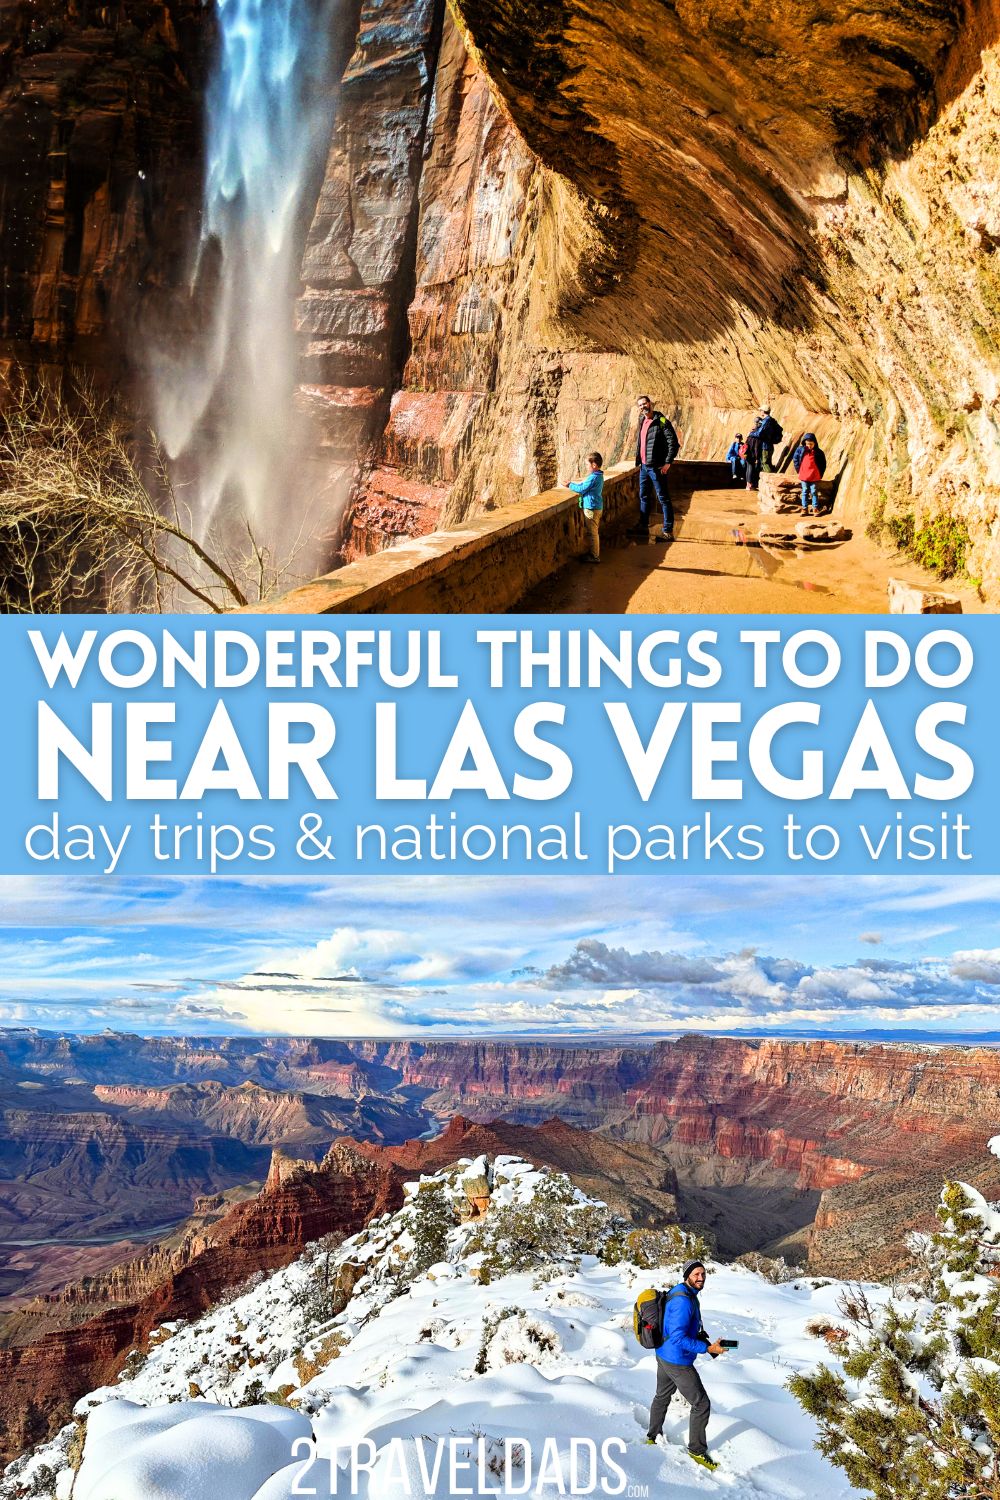 There are really fun, interesting things to do near Las Vegas that can be day trips or short overnight visits. From hiking in local conservation areas to visiting 6 different National Parks near Vegas, you can turn a Sin City trip into an amazing vacation.